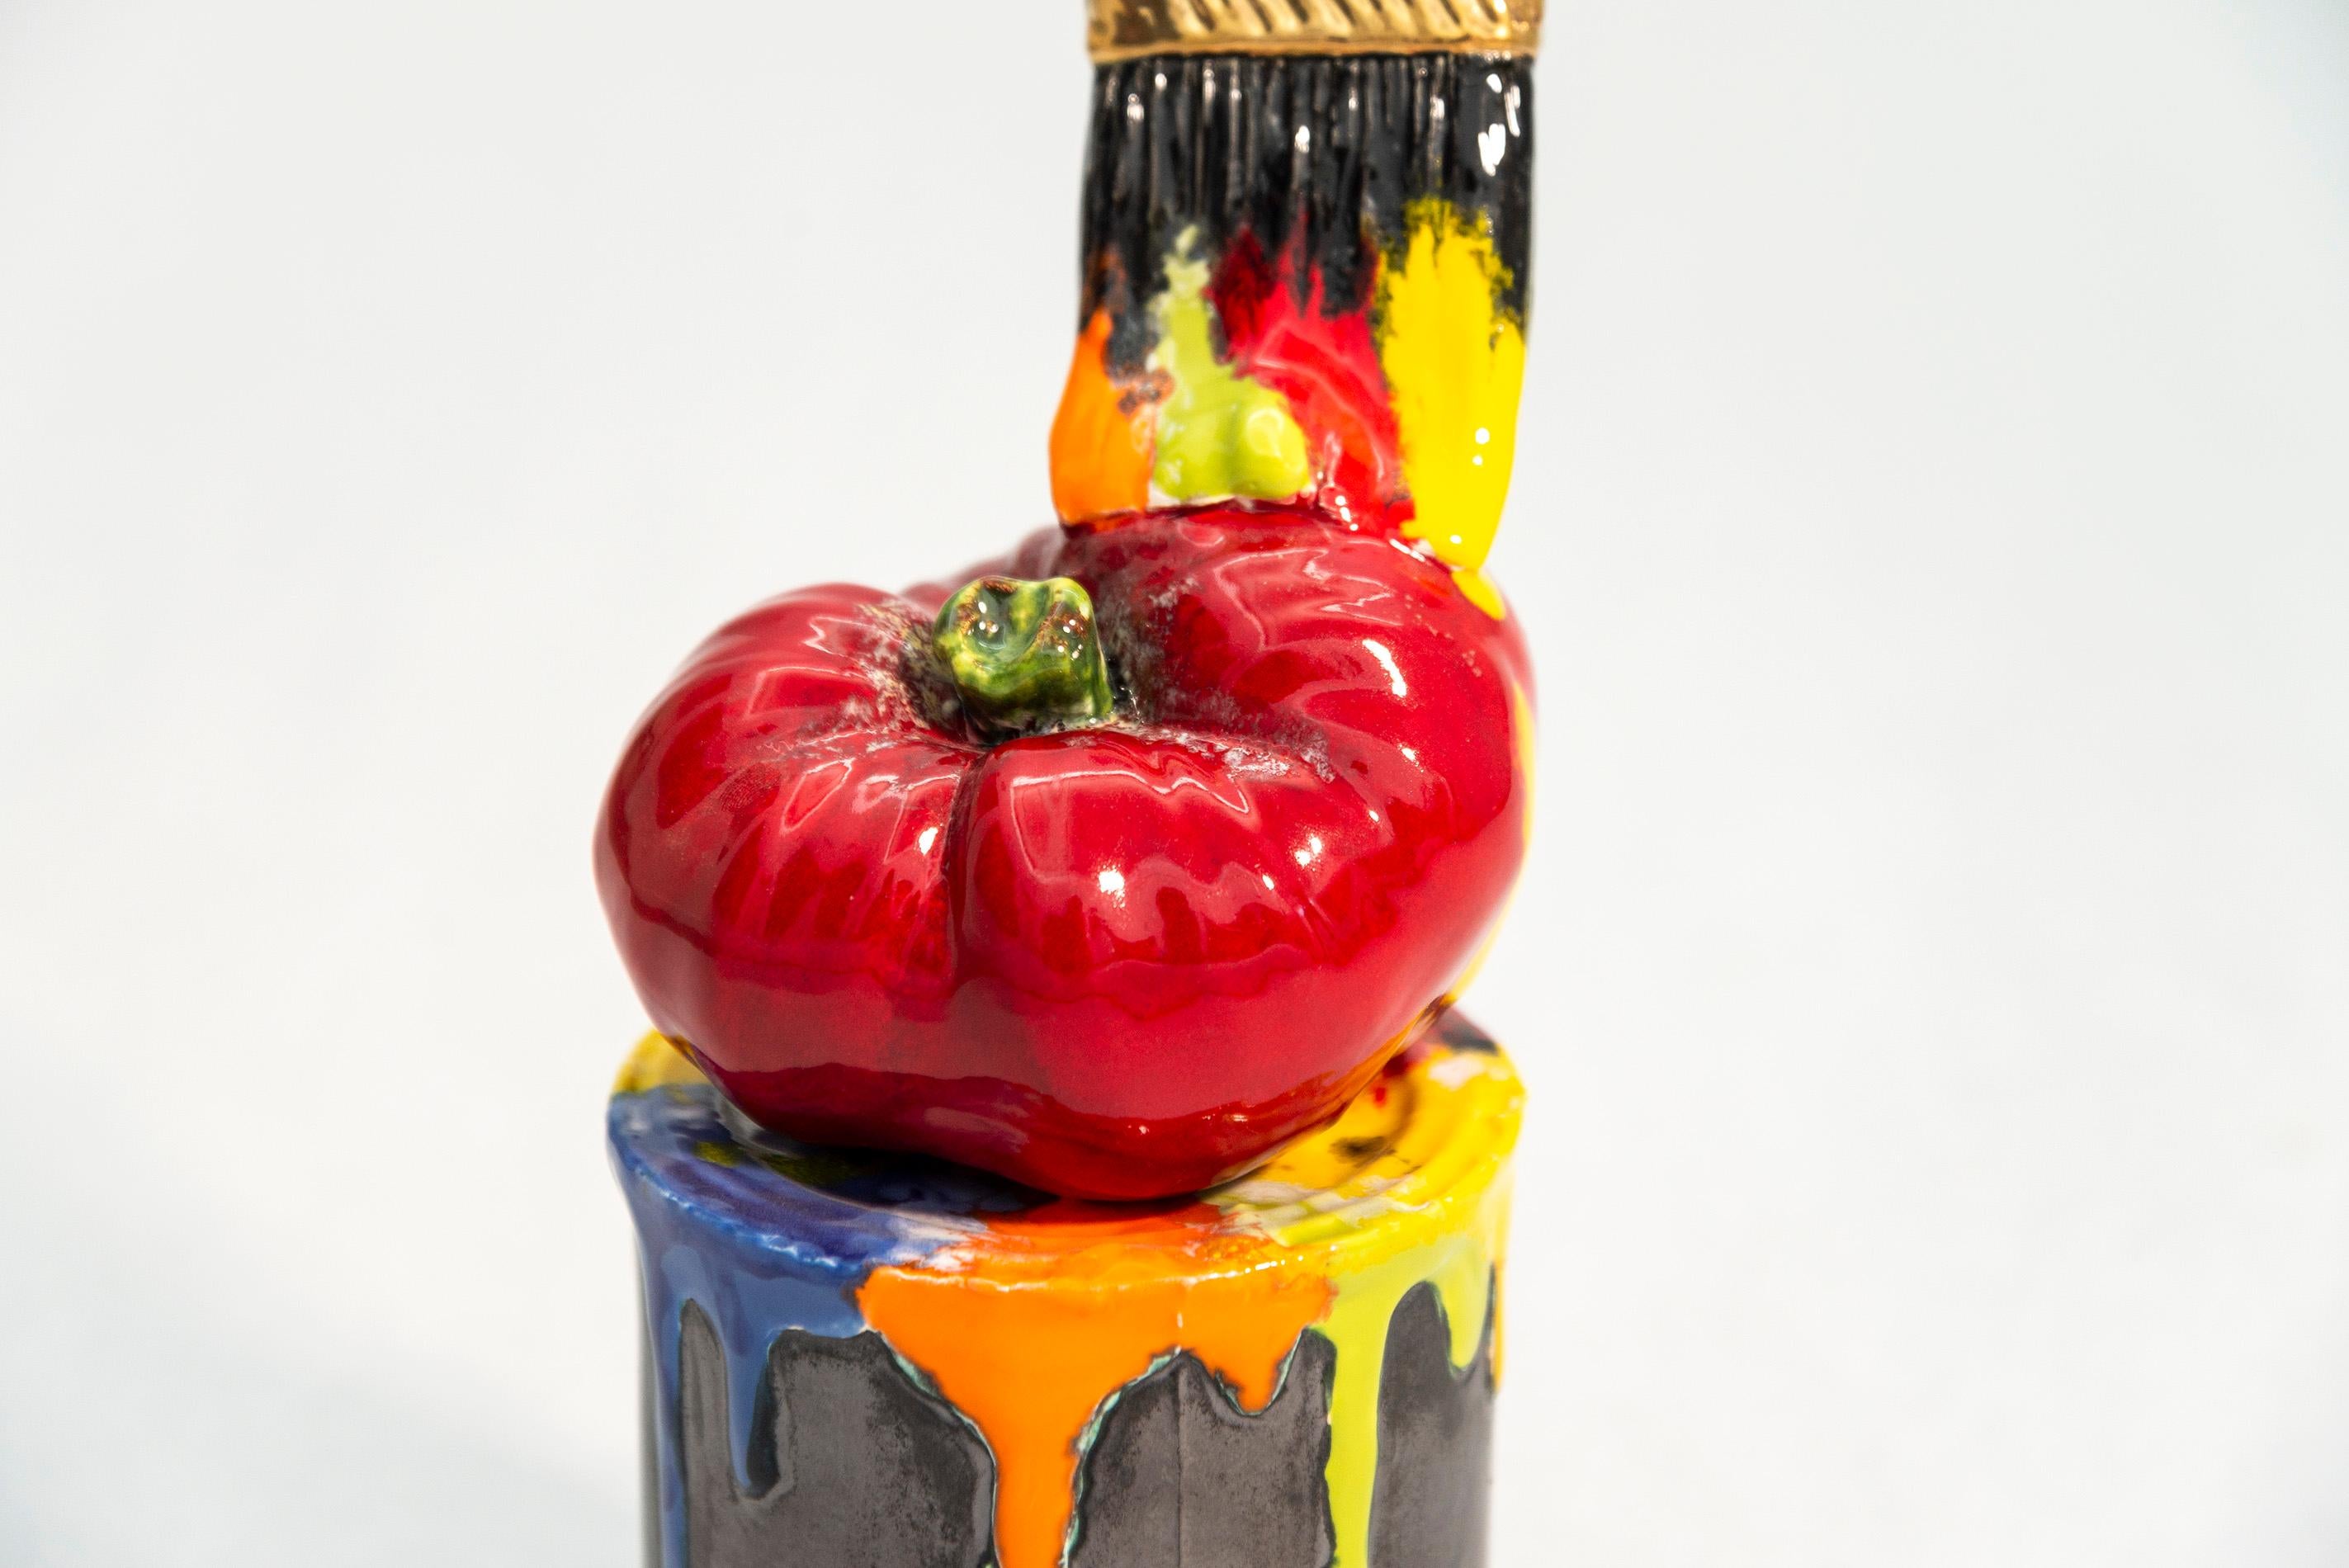 Saskatchewan born sculptor Victor Cicansky creates whimsical, imaginative work rooted in a love of nature and gardening. This is one of a series of pieces he made, sculpted from clay of a paint can with a brush ‘stuck’ in a tomato. The bright